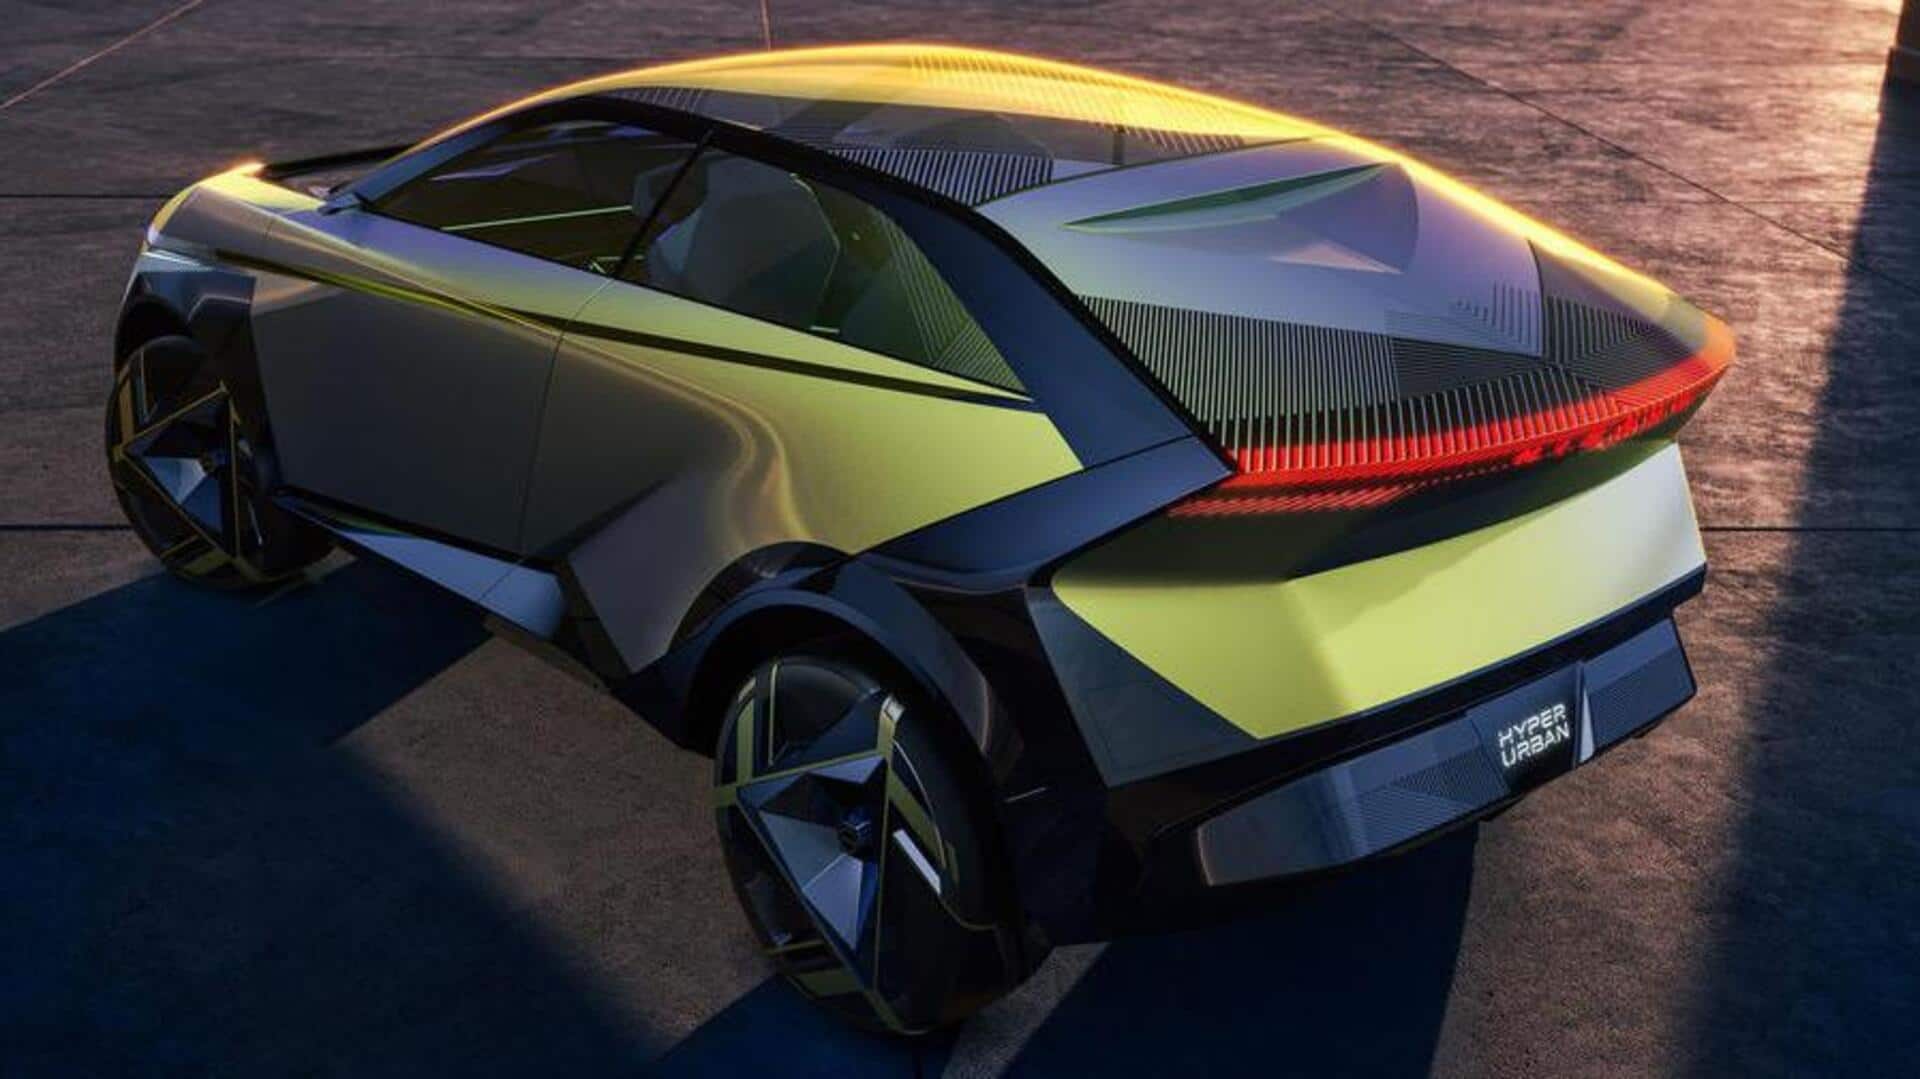 Nissan's radical concept car offers a glimpse into future EVs